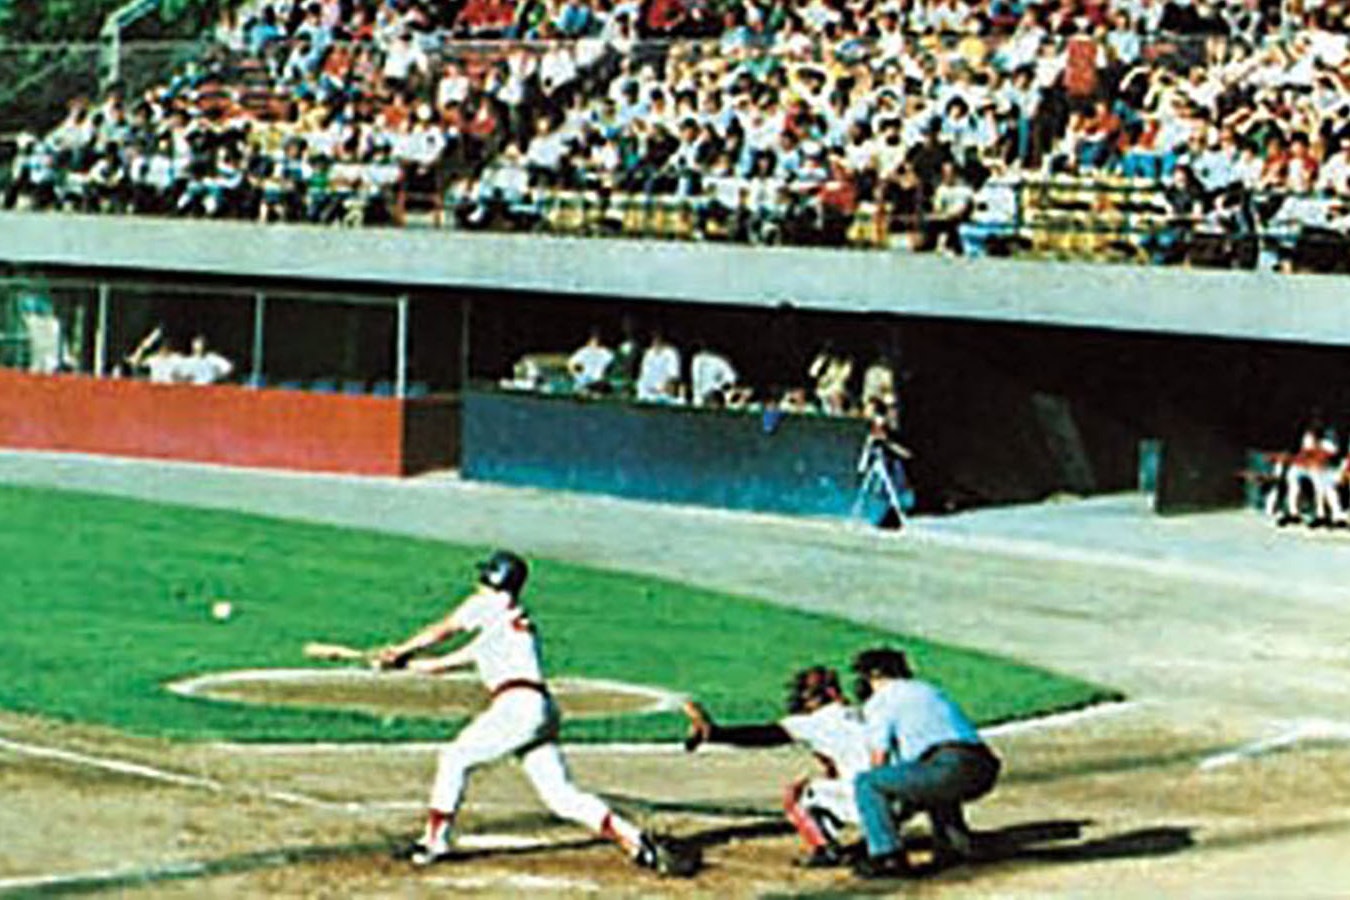 Dave Koza drives in the winning run in the bottom of the 33rd inning to end the longest baseball game ever played.